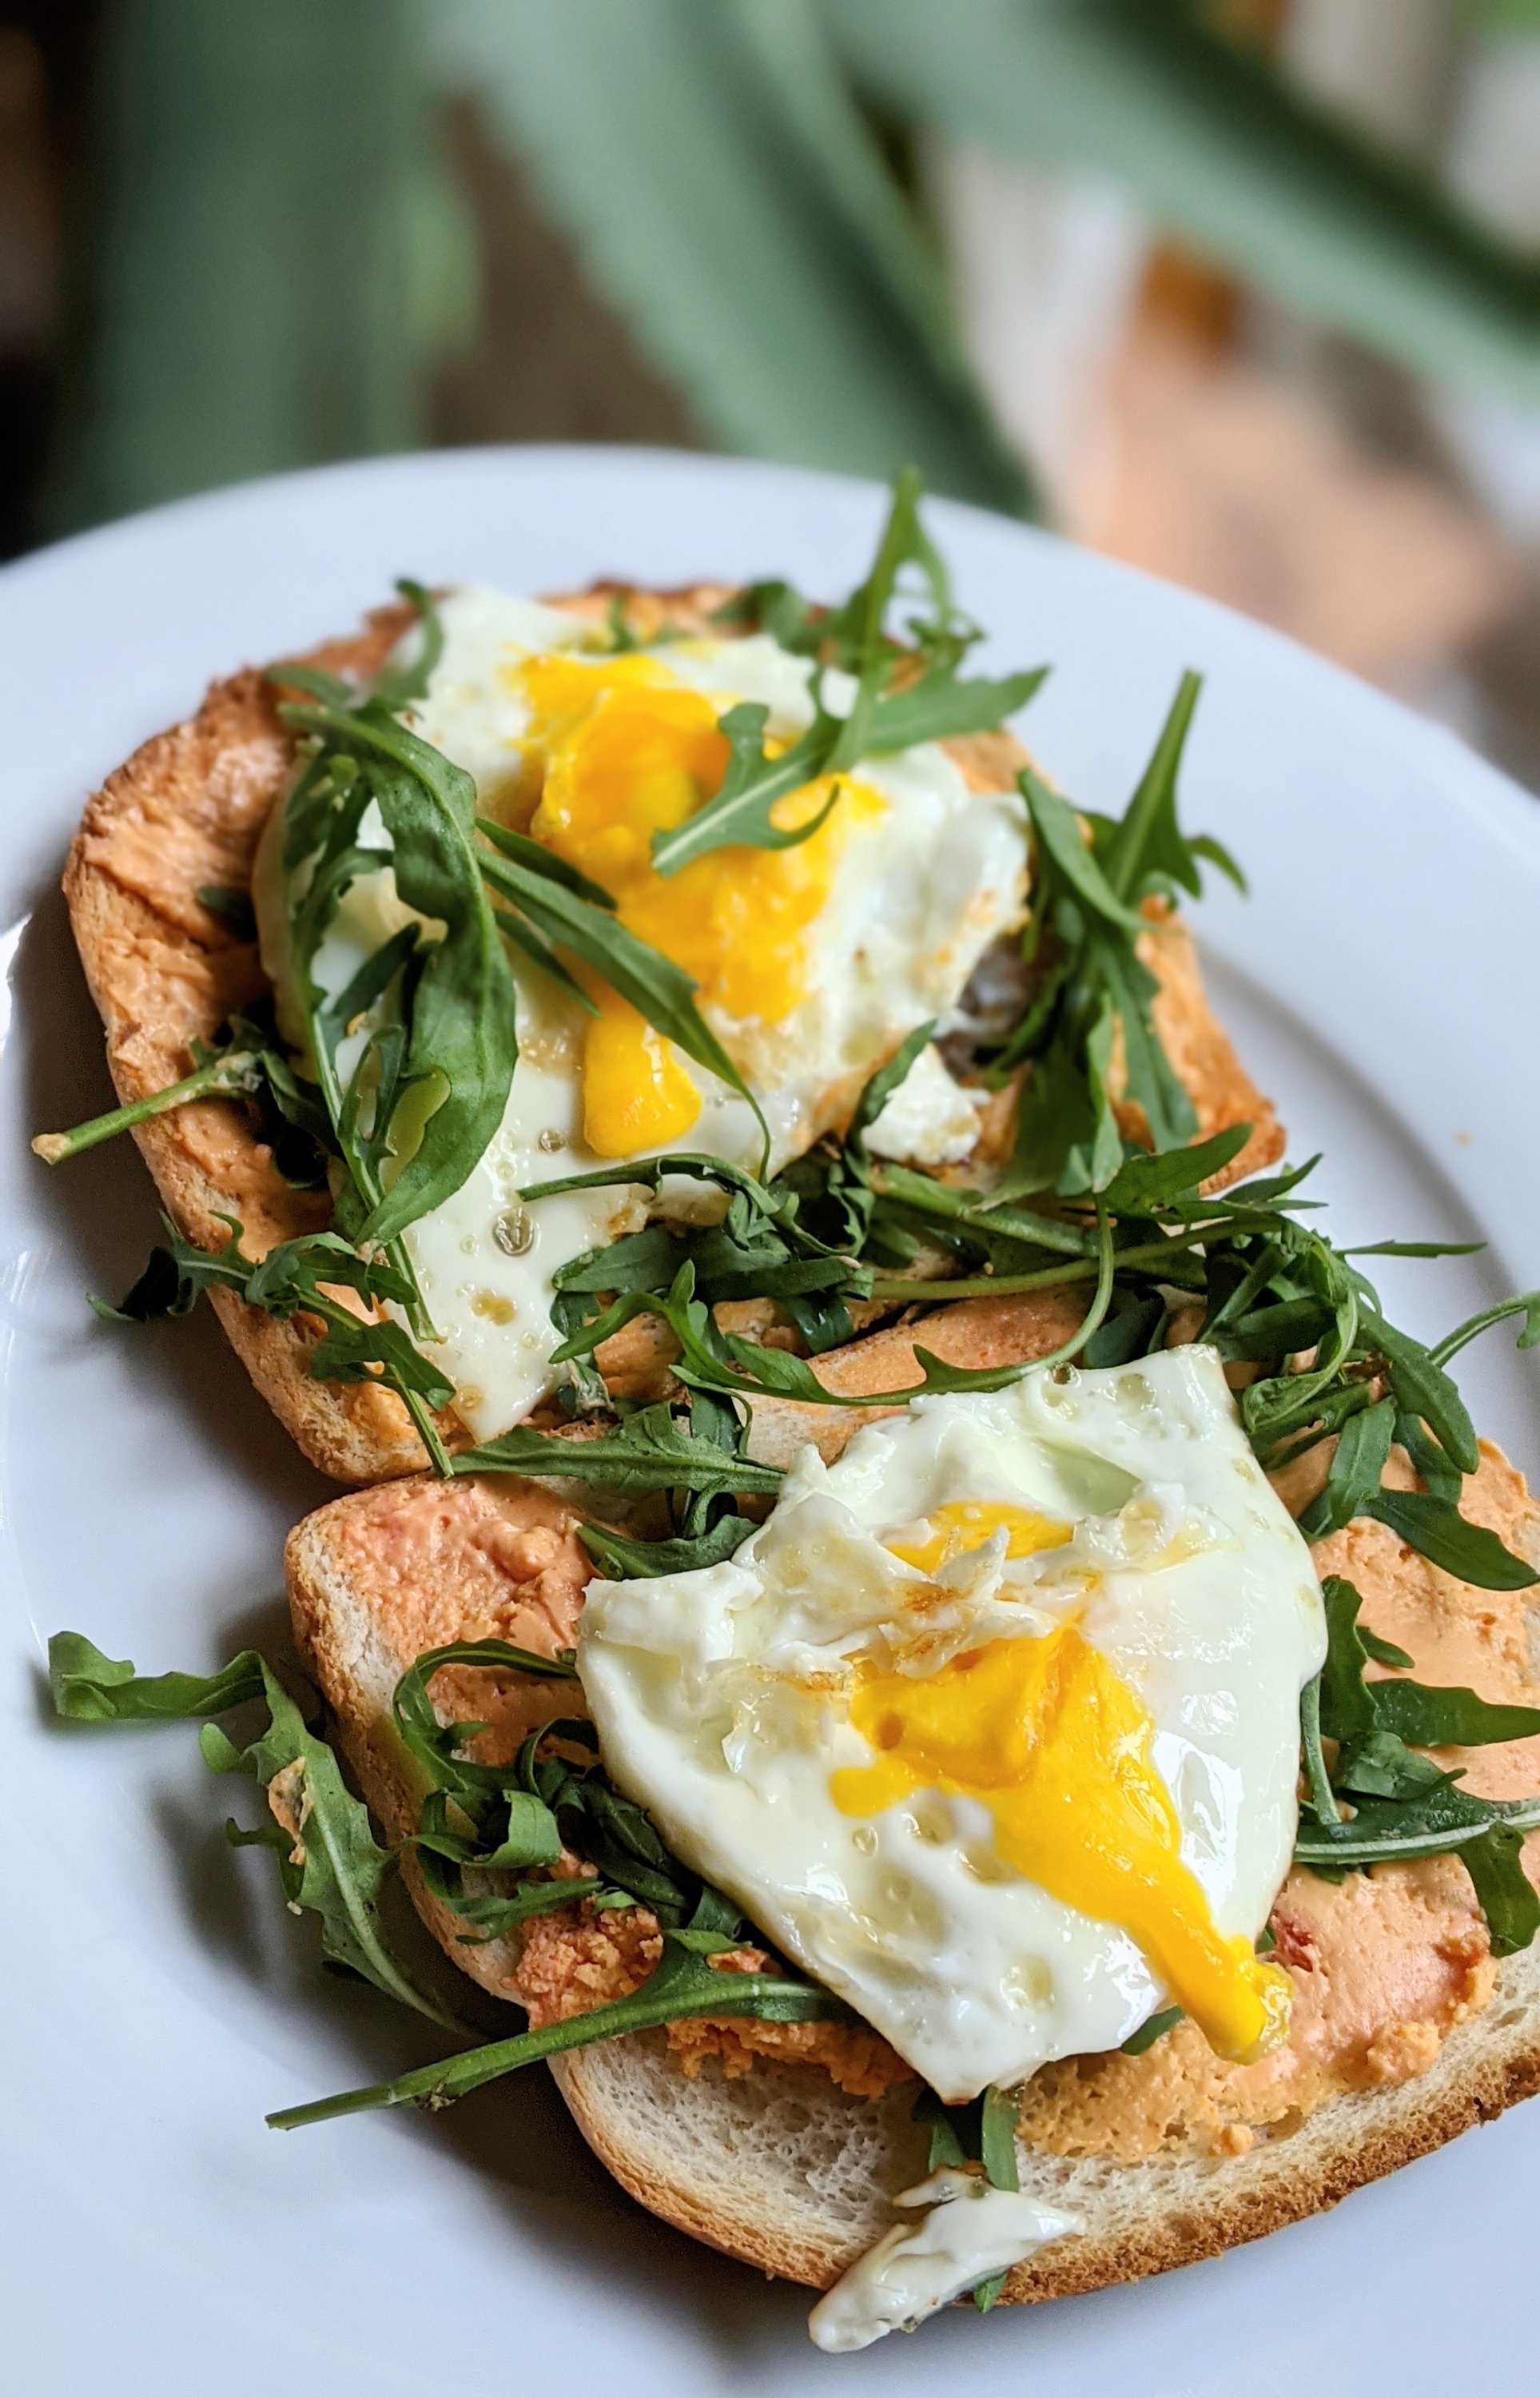 open faced cheese egg and arugula sandwich with pub cheese spread port wine or white cheddar spreadable cheese on brioche toast with leafy greens and a fried egg on top vegetarian fancy breakfasts bougie as hell great hungover breakfast ideas without meat